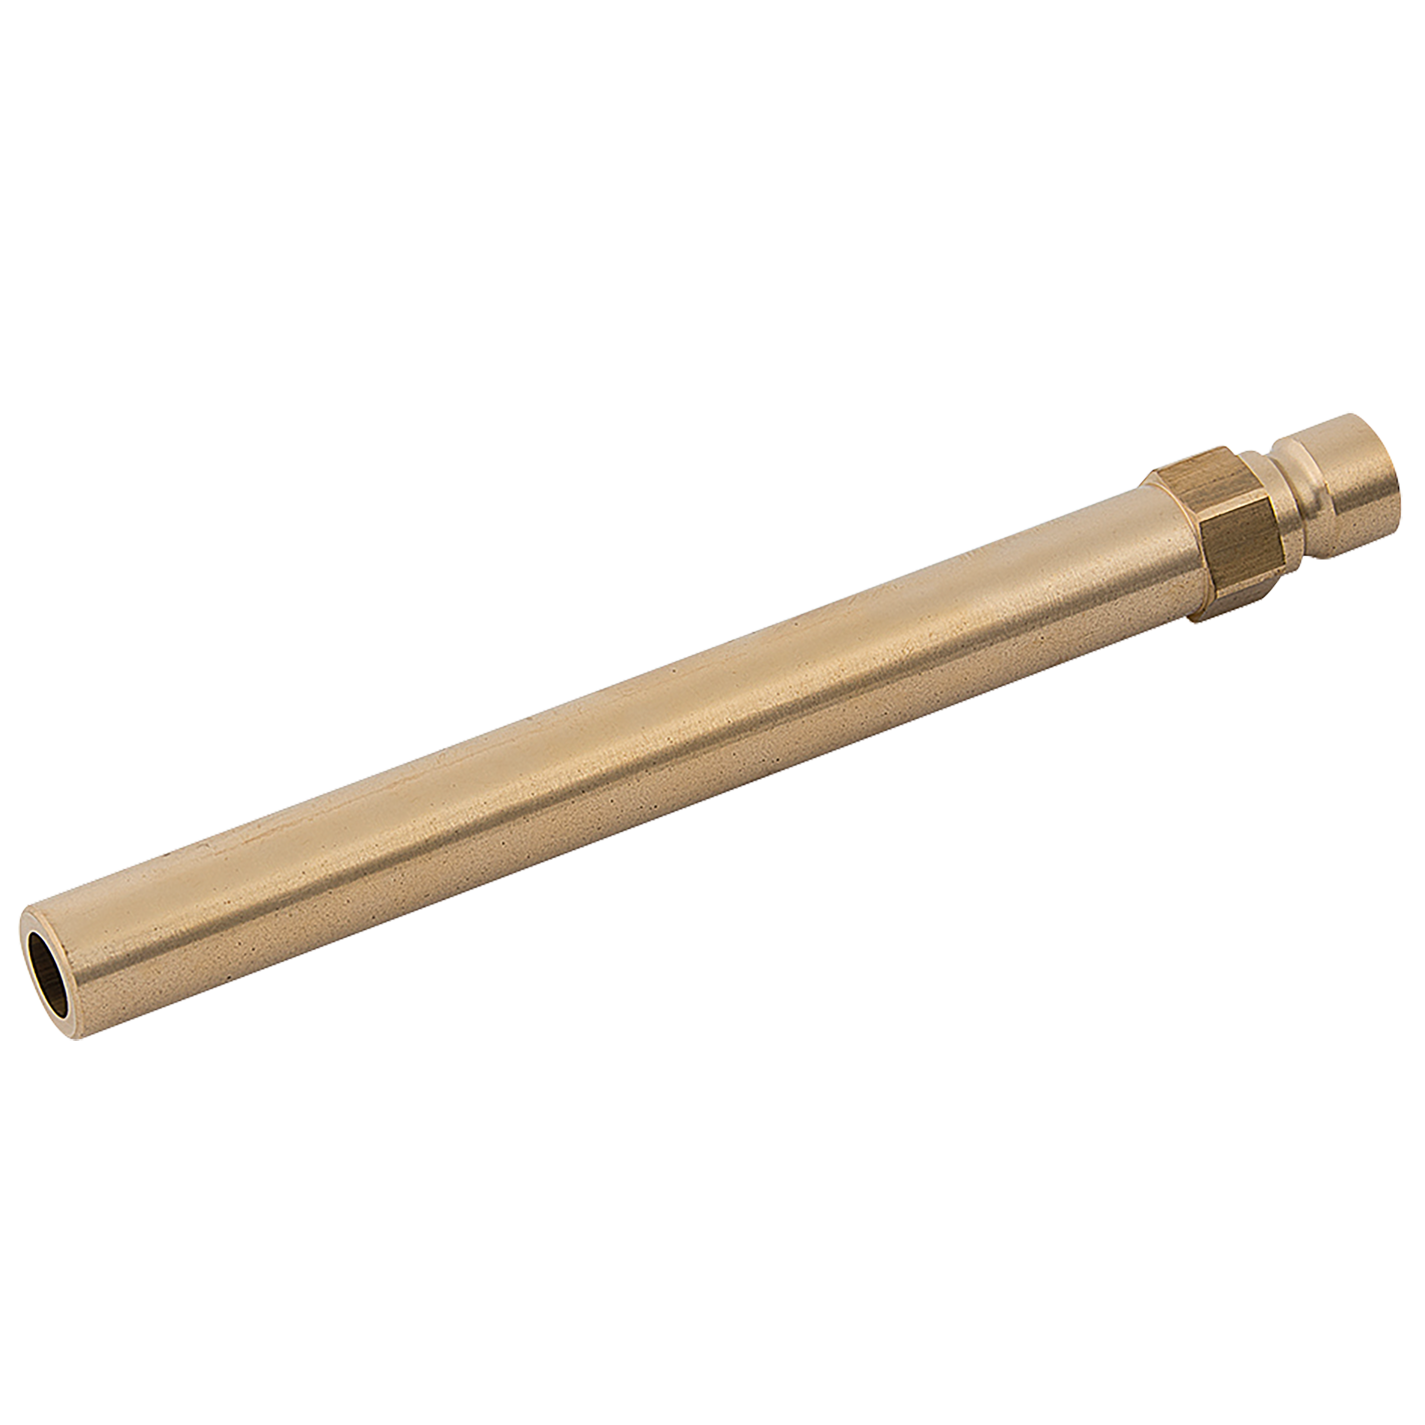 10mm OD Non-valved, Extension Plug